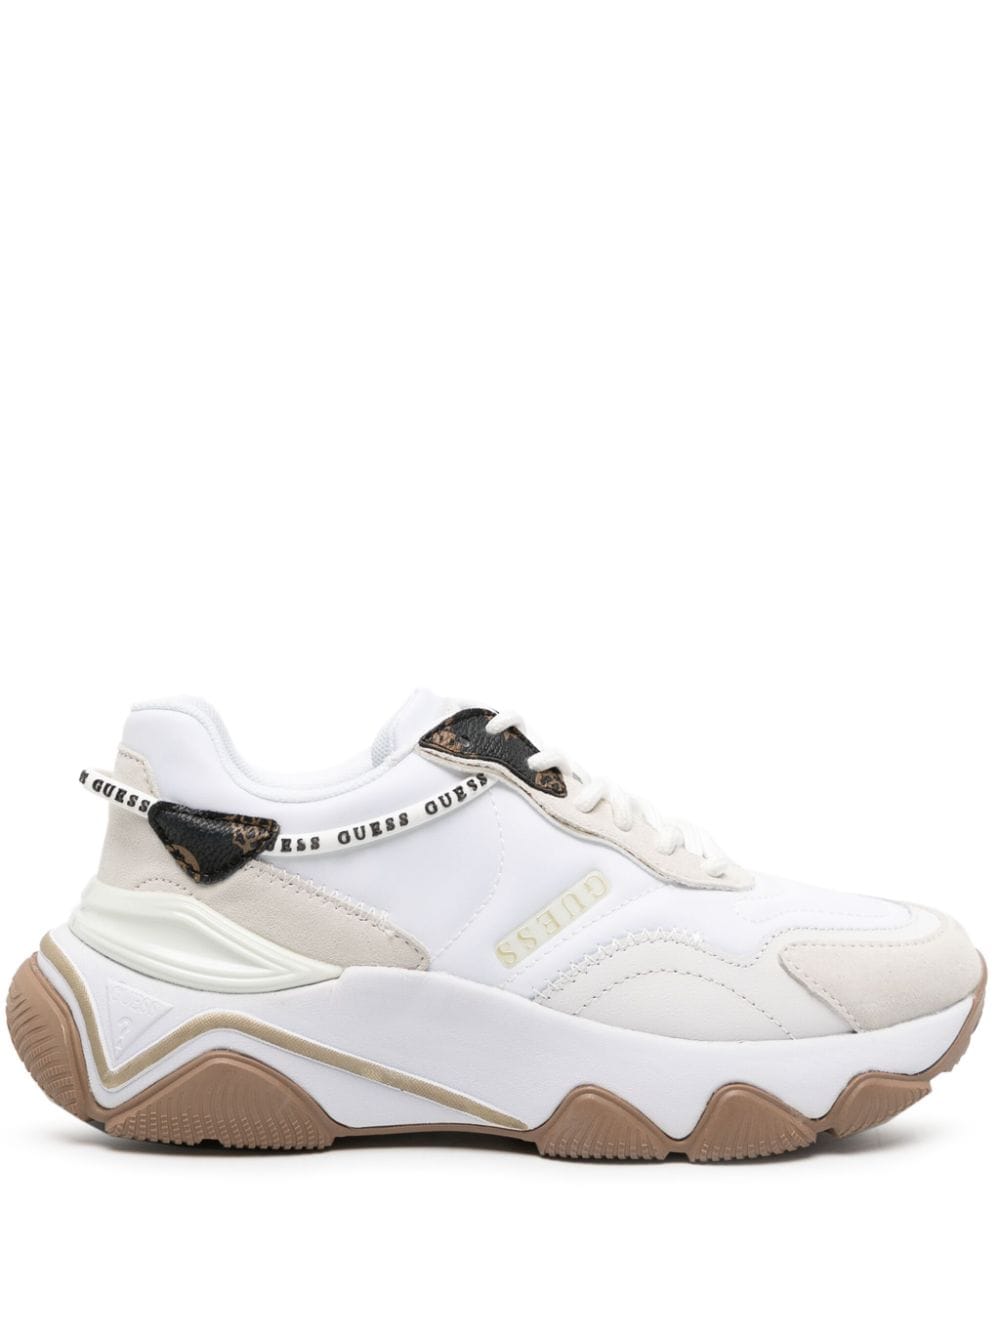 GUESS USA Sneakers Micola Active chunky - Bianco